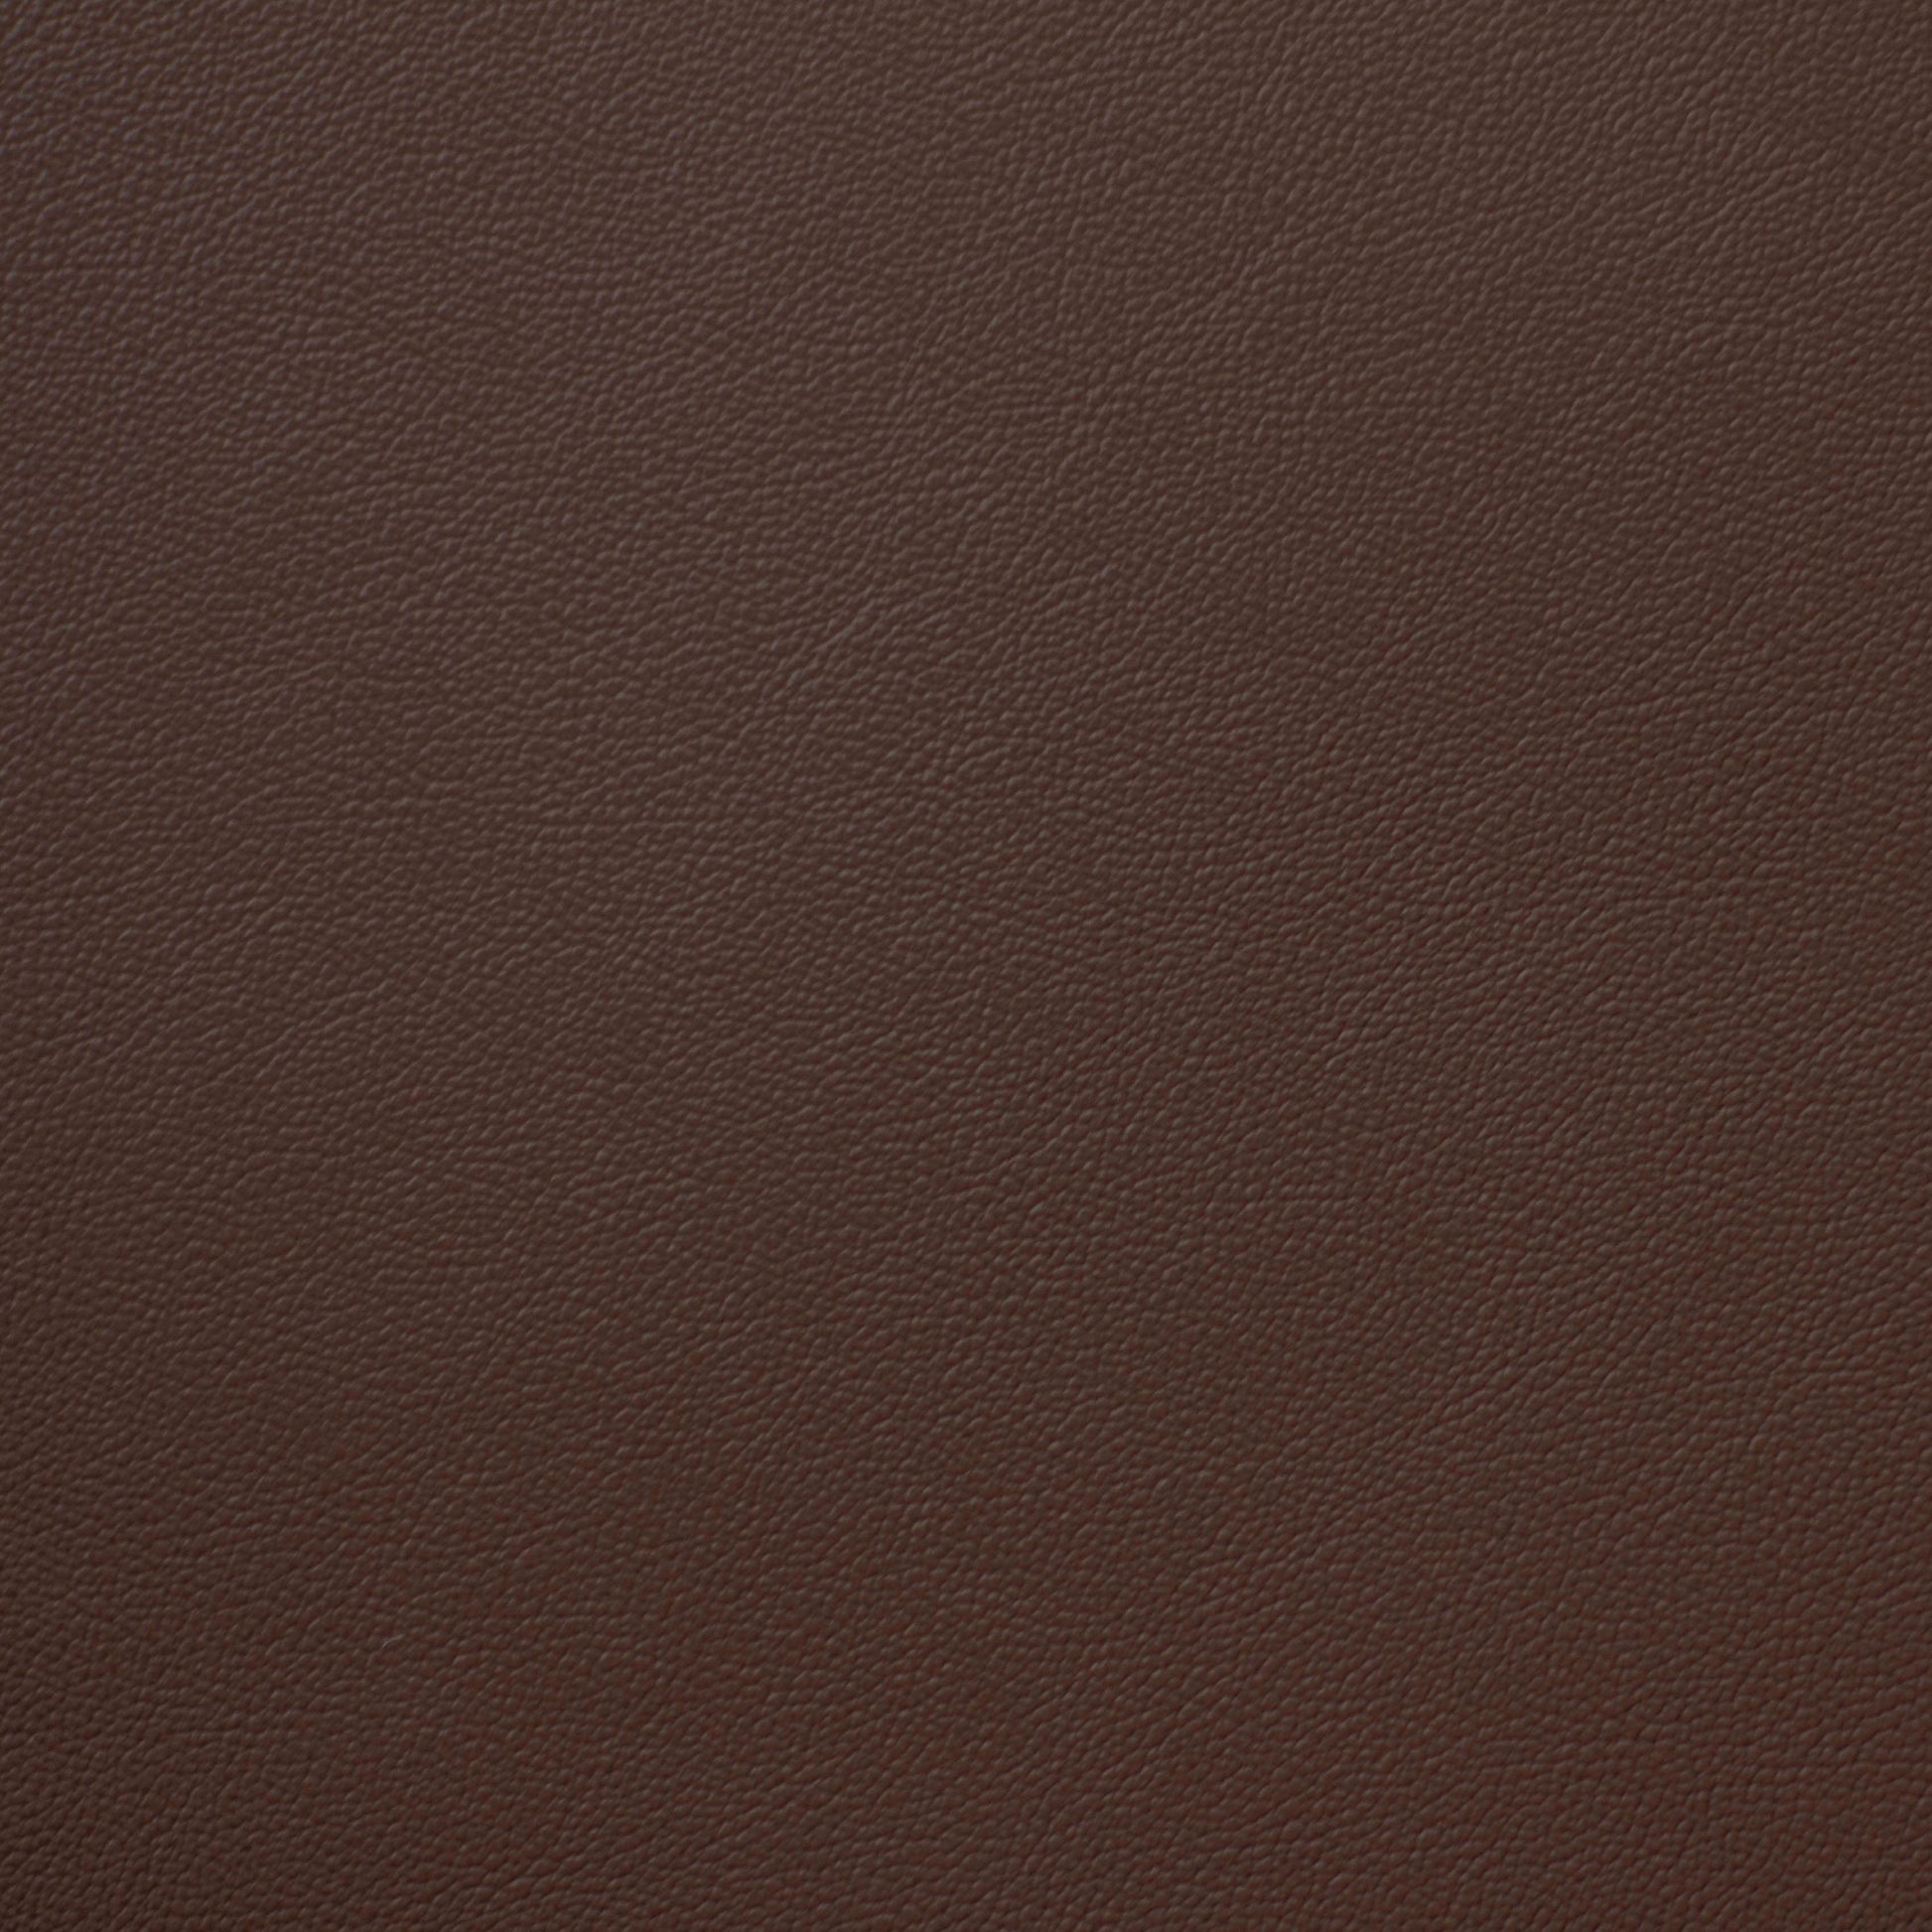 Empire, Ganache, Iconic® Antimicrobial & Cleanable, Hospitality Leather Hide